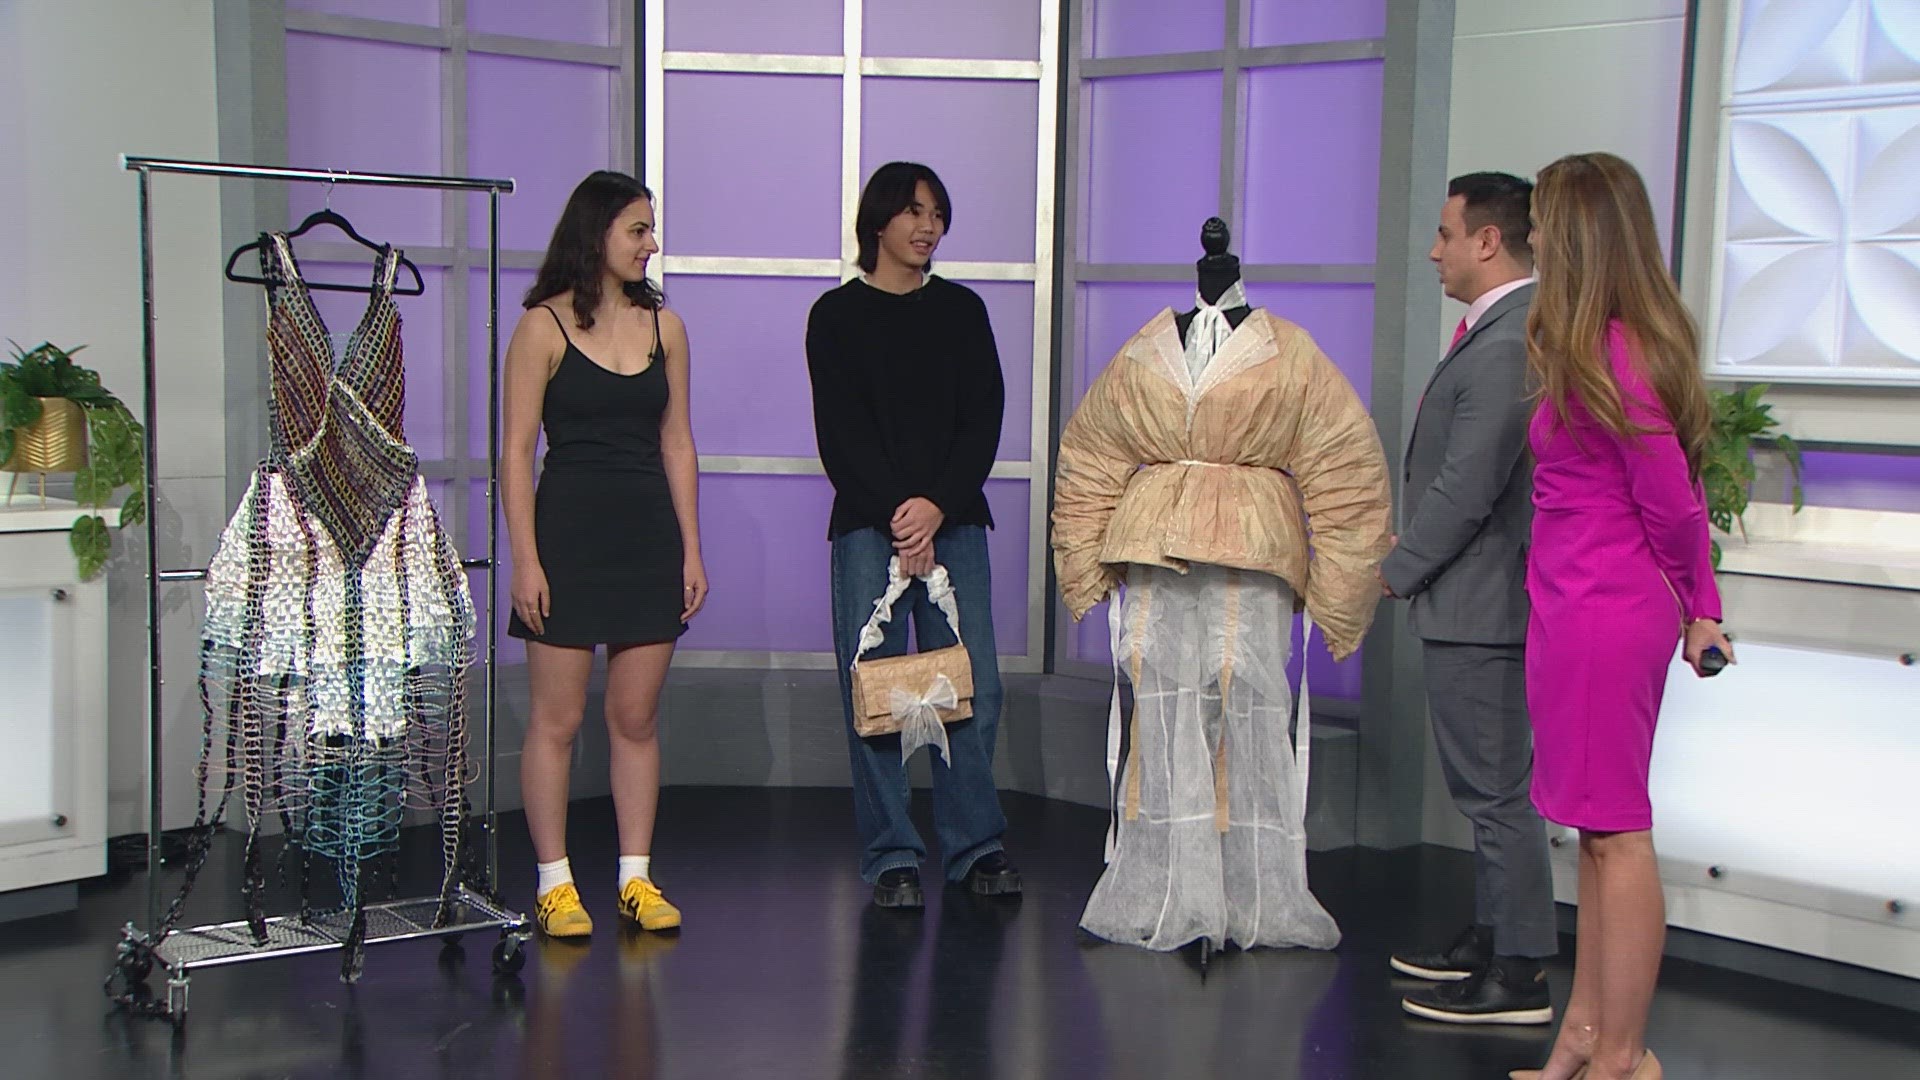 Two designers from the Trash the Runway design competition join 9NEWS mornings to share more about the inspiration behind their designs.